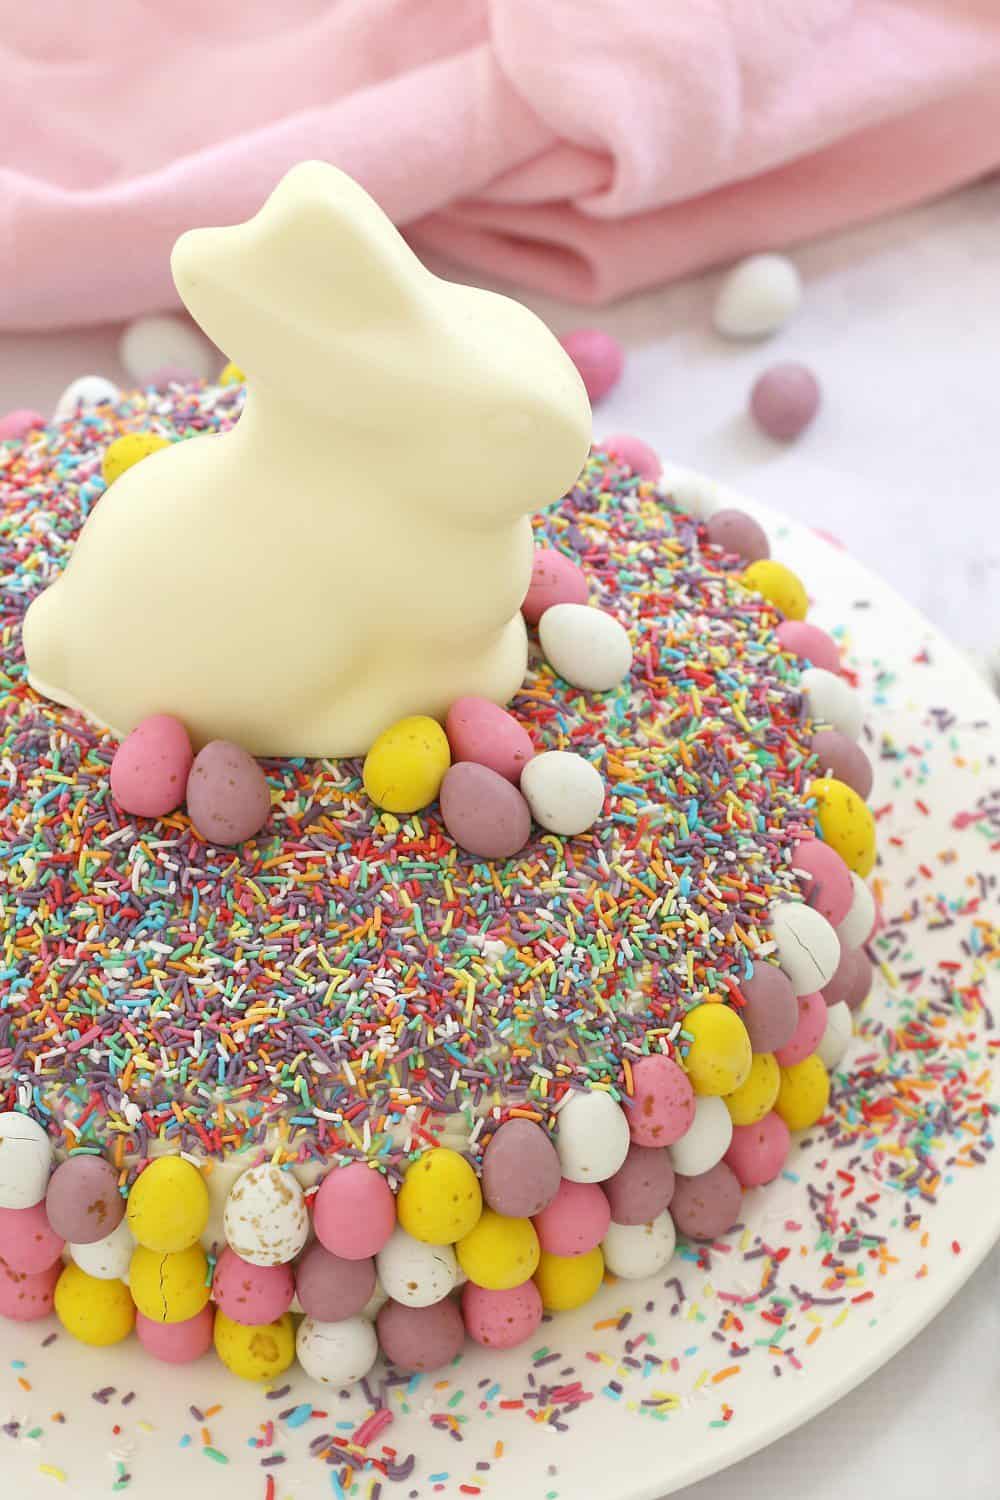 A round cake decorated with sprinkles, mini coloured Easter eggs and a white bunny on top